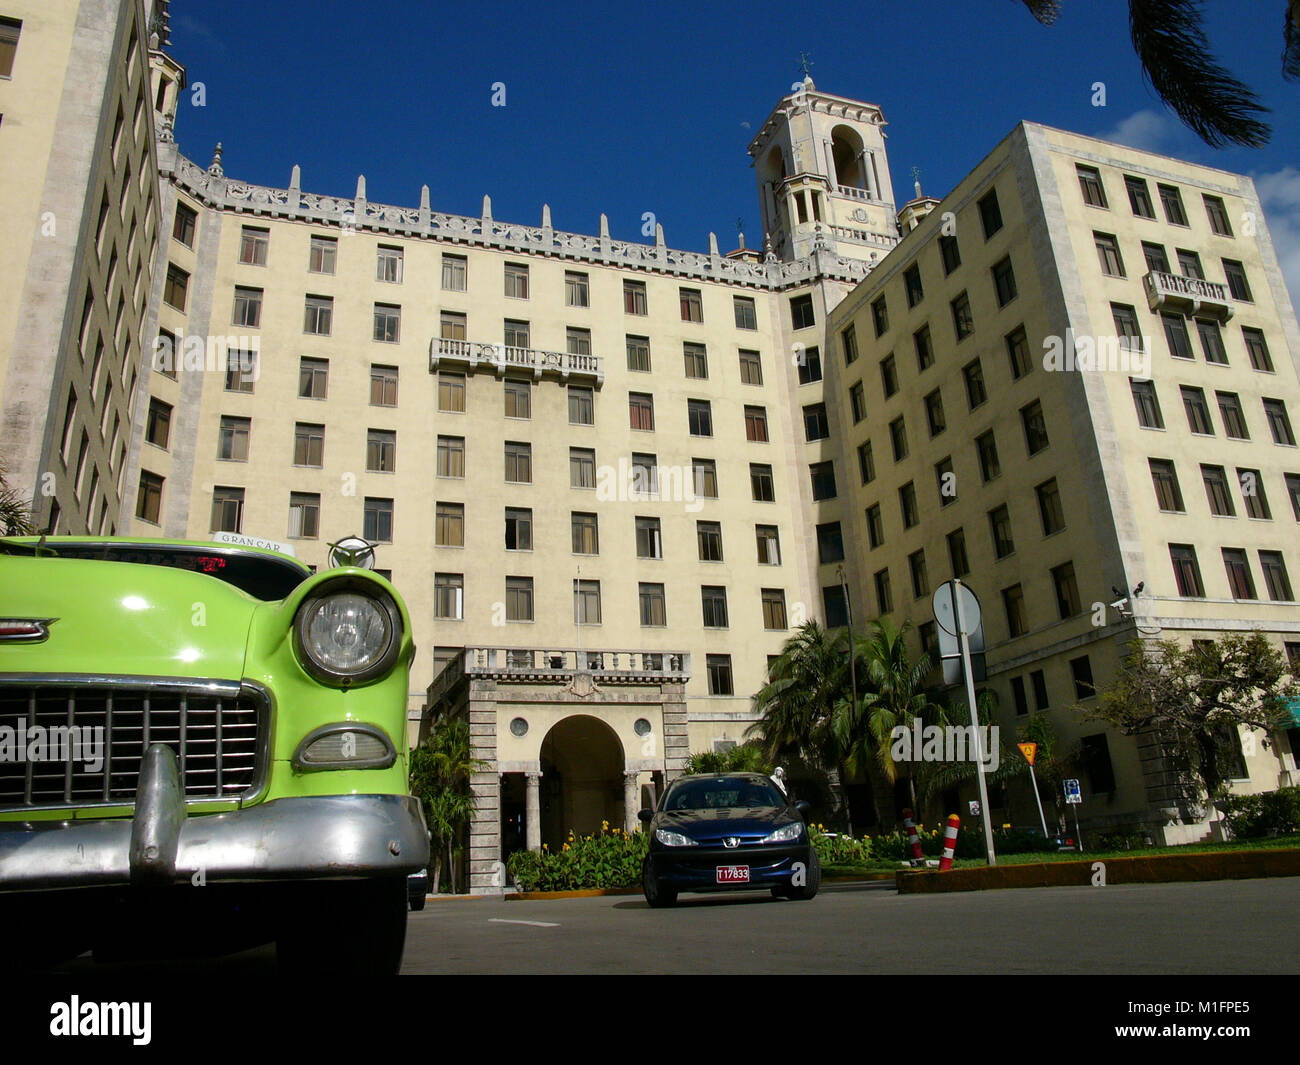 Mar 28, 2006 - Havana, CUBA - The Hotel Nacional de Cuba, Cuba's most prestigious and famous hotel. The Republic of Cuba is located in the northern Caribbean and south of the United States. The first European to visit Cuba was explorer Christopher Columbus in 1492. Centuries of colonial rule and revolutions followed. Batista was deposed by Fidel Castro and Che guevara in 1953. After the revolution trade with comminist Russia grew. The economy was hit hard in the 1990s following the collapse of the Soviet Union. Cuba currently trades with almost every nation in the world, albeit with restrictio Stock Photo